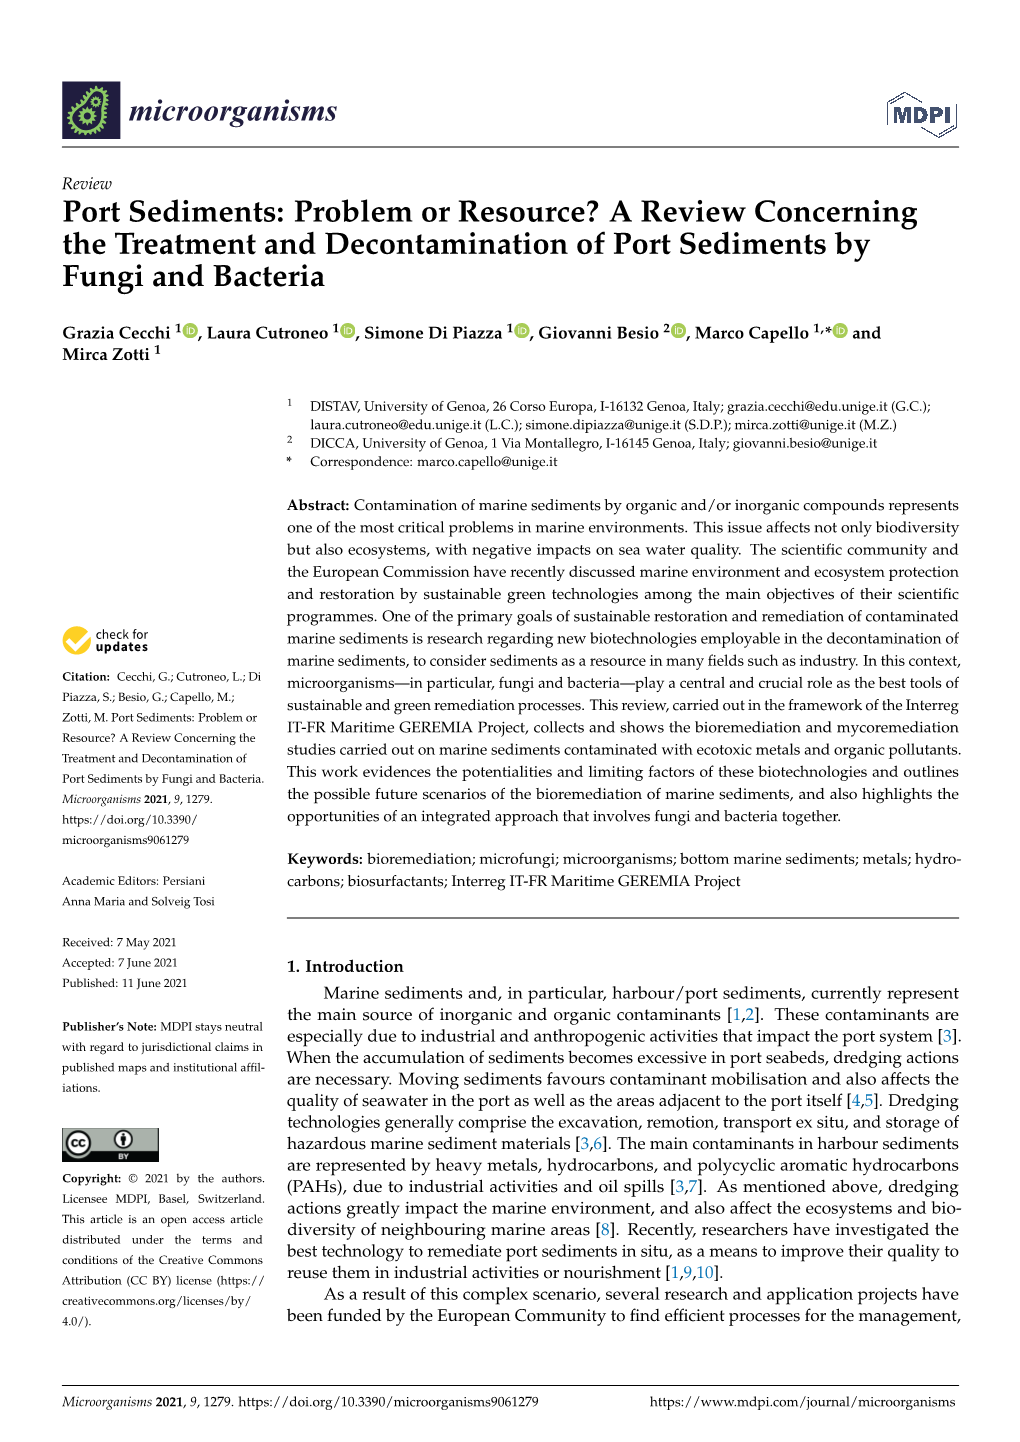 Port Sediments: Problem Or Resource? a Review Concerning the Treatment and Decontamination of Port Sediments by Fungi and Bacteria